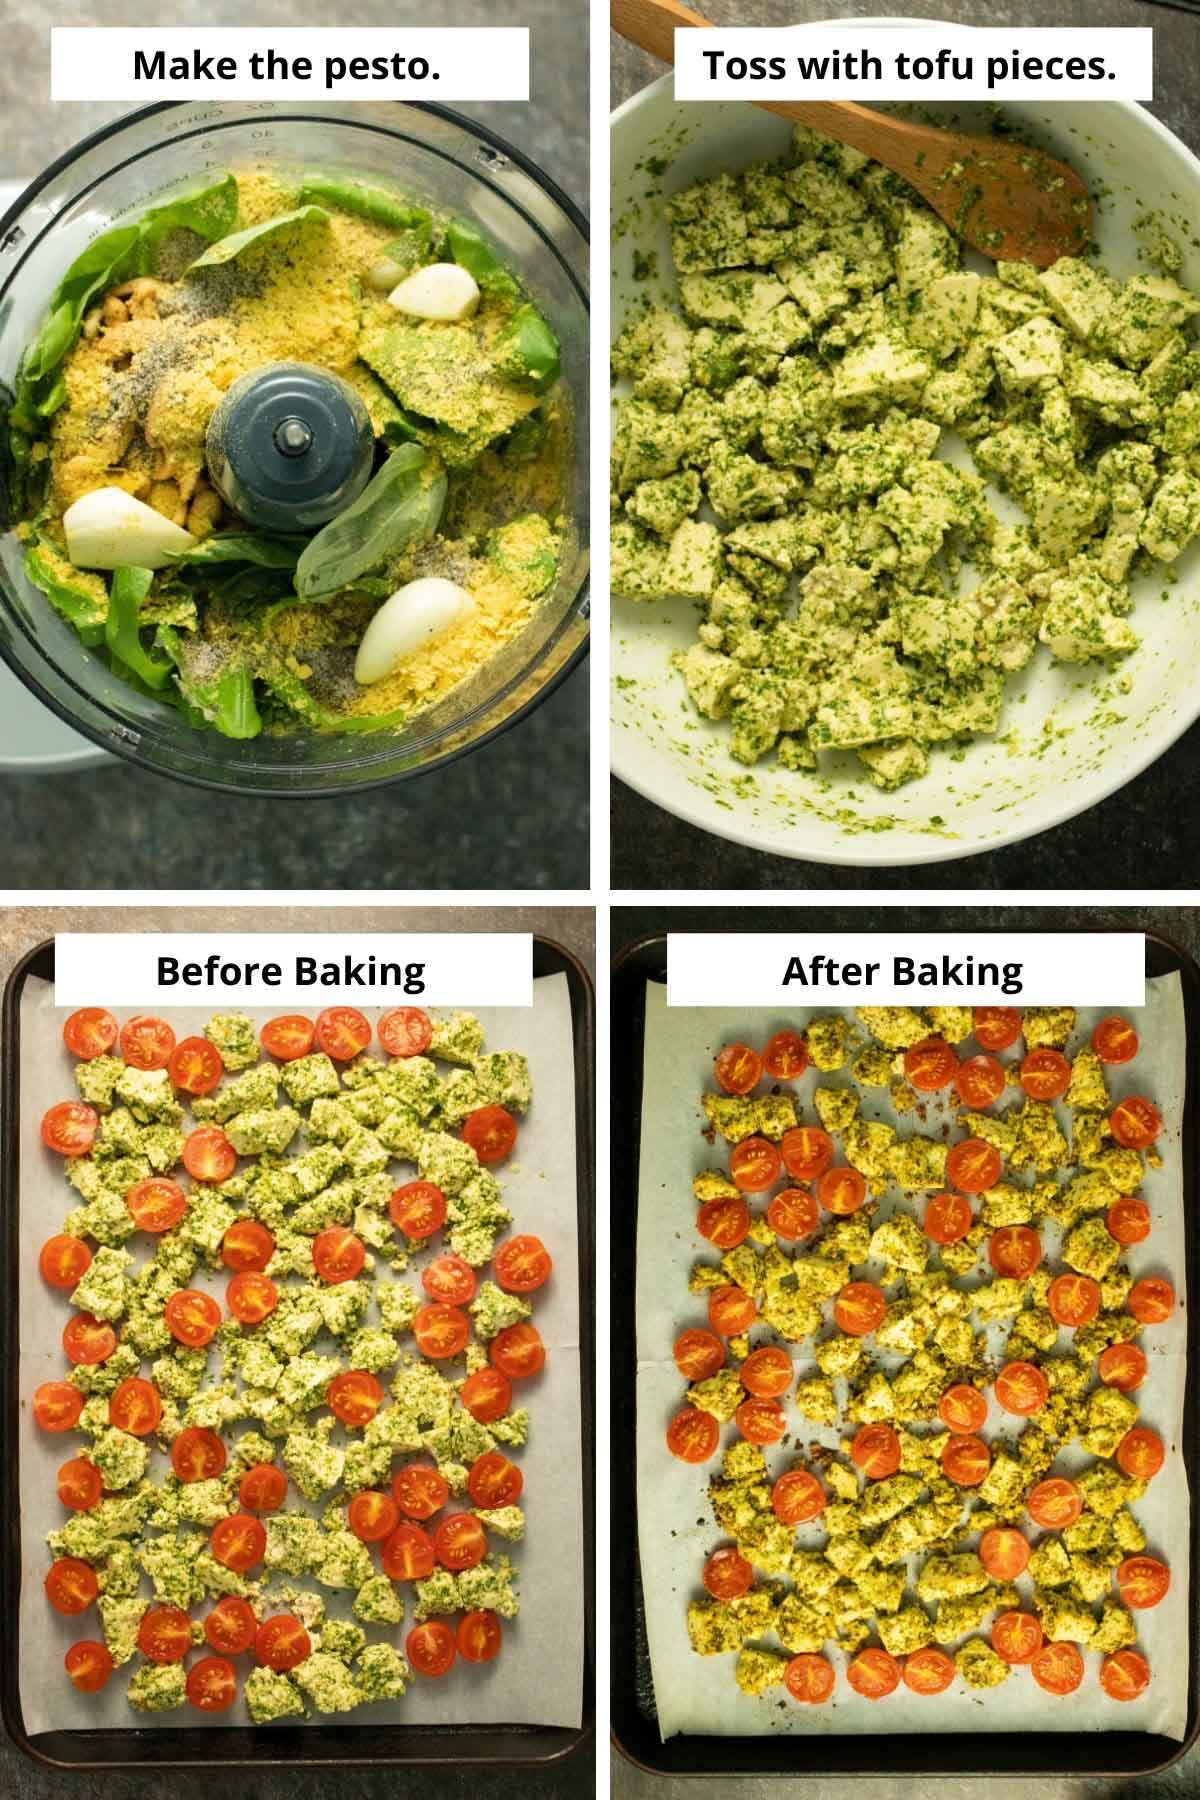 image collage showing pesto ingredients in the blender, then pesto tossed with the torn tofu pieces, and the tofu on the baking sheet with tomato halves, before and after baking